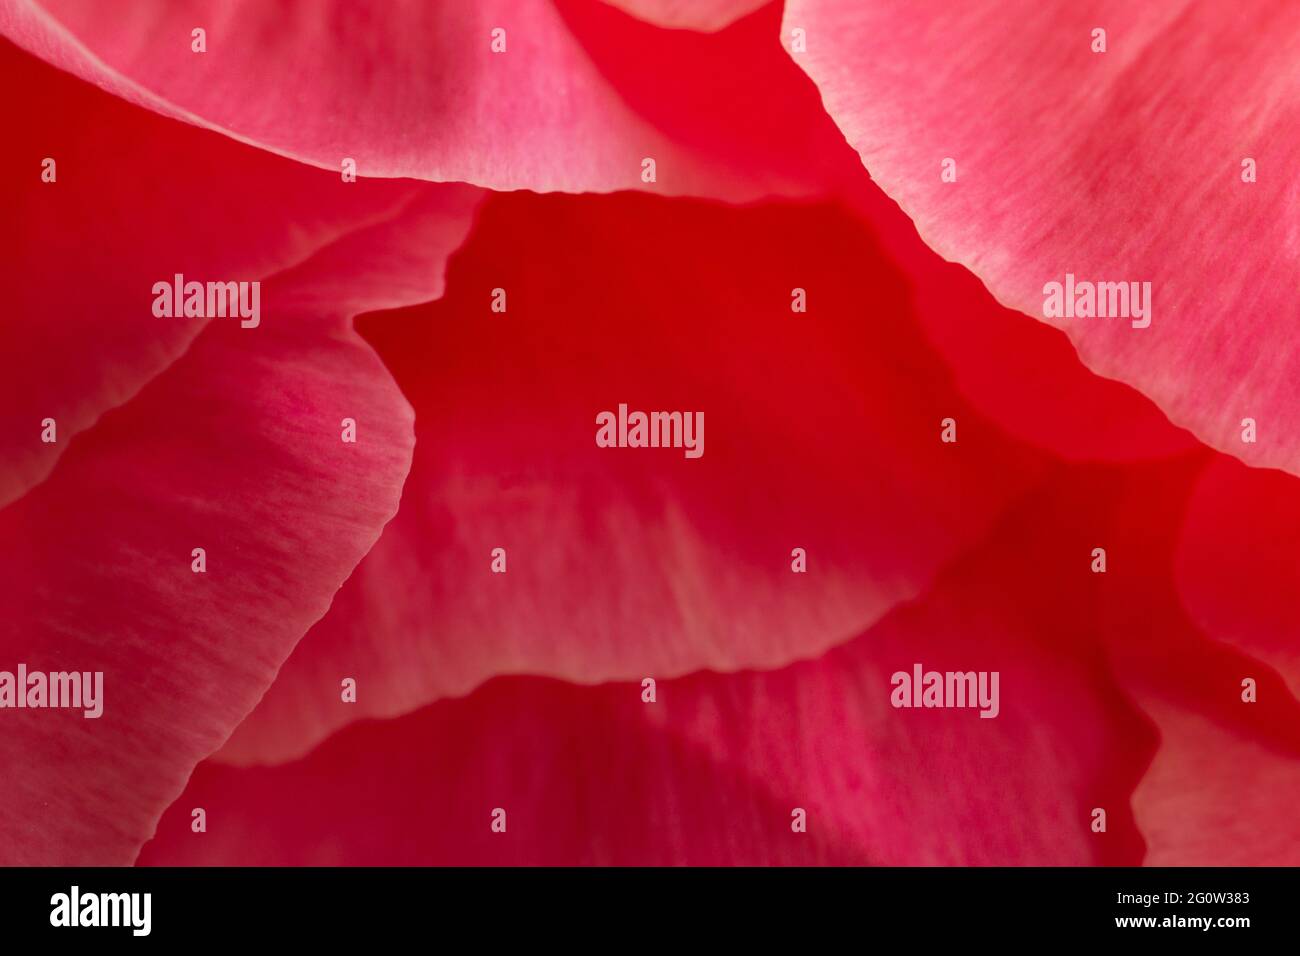 Layers of soft petals of a Peony flower in extreme close up Stock Photo